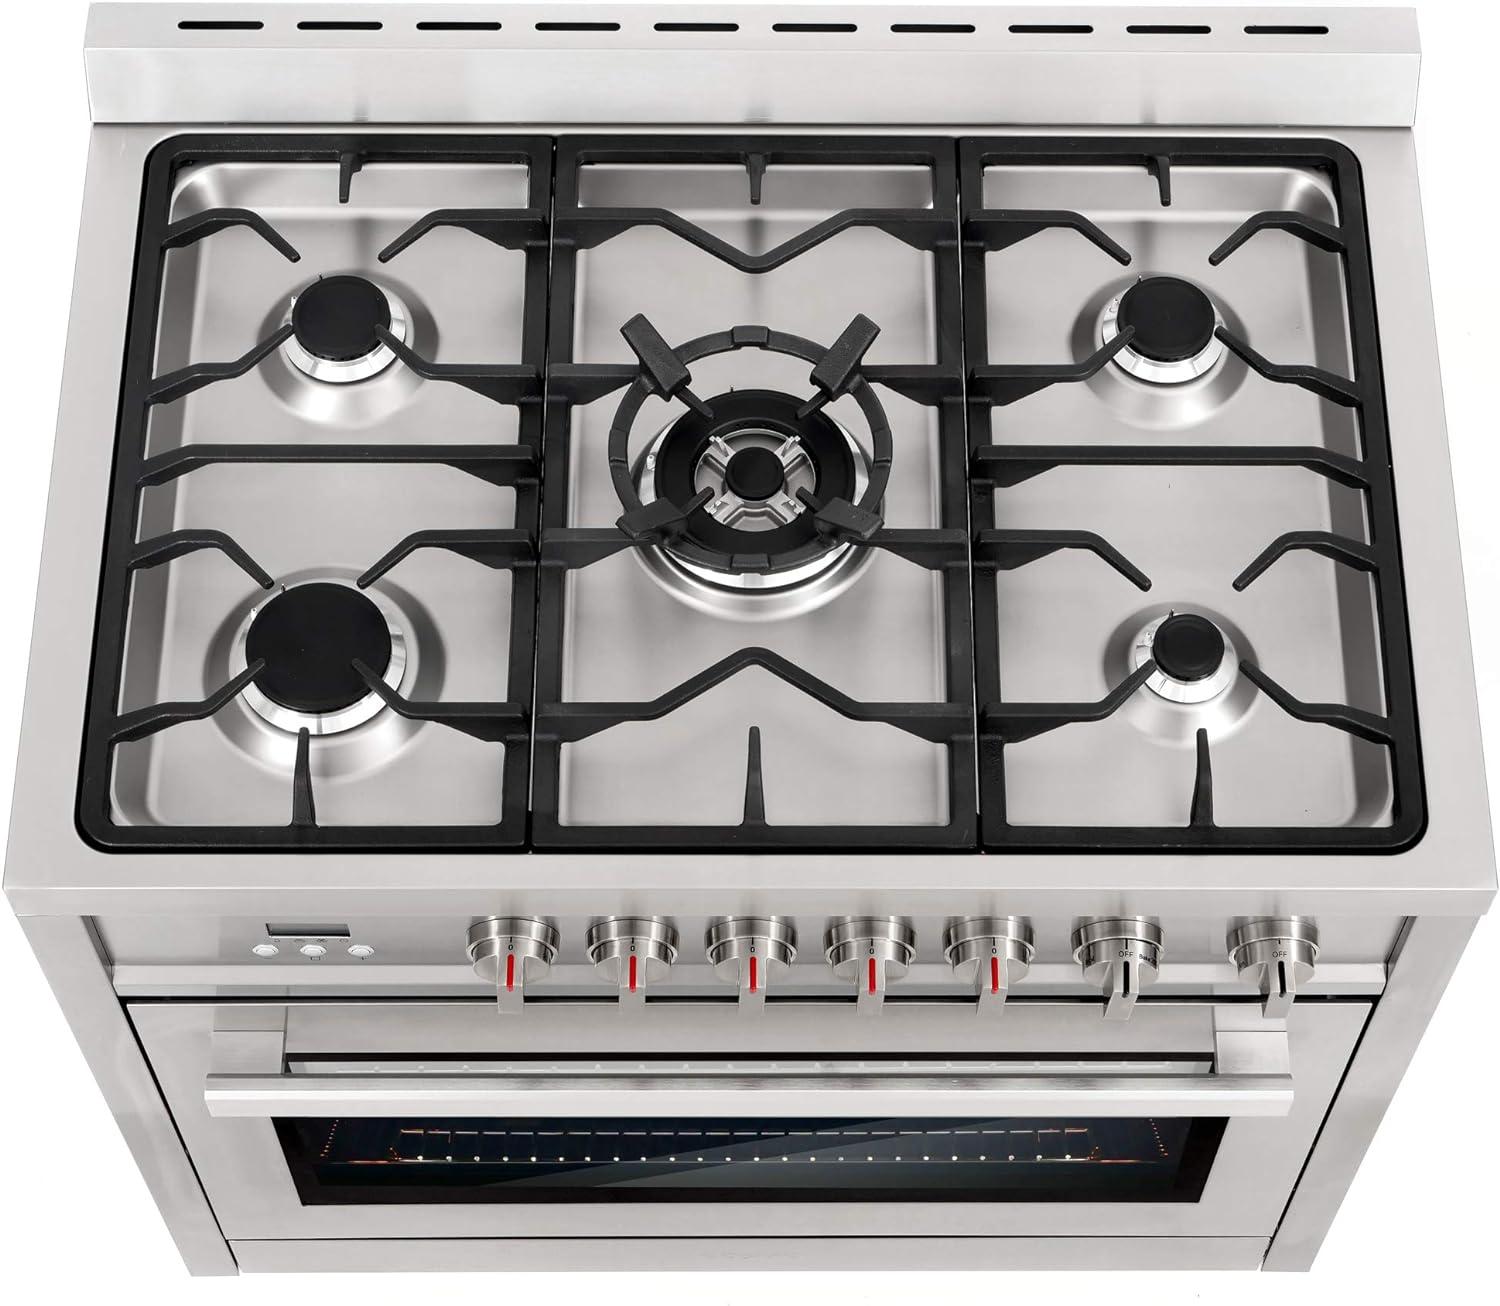 Stainless Steel 36" Gas Range with 5 Burner Cooktop and Rapid Convection Oven